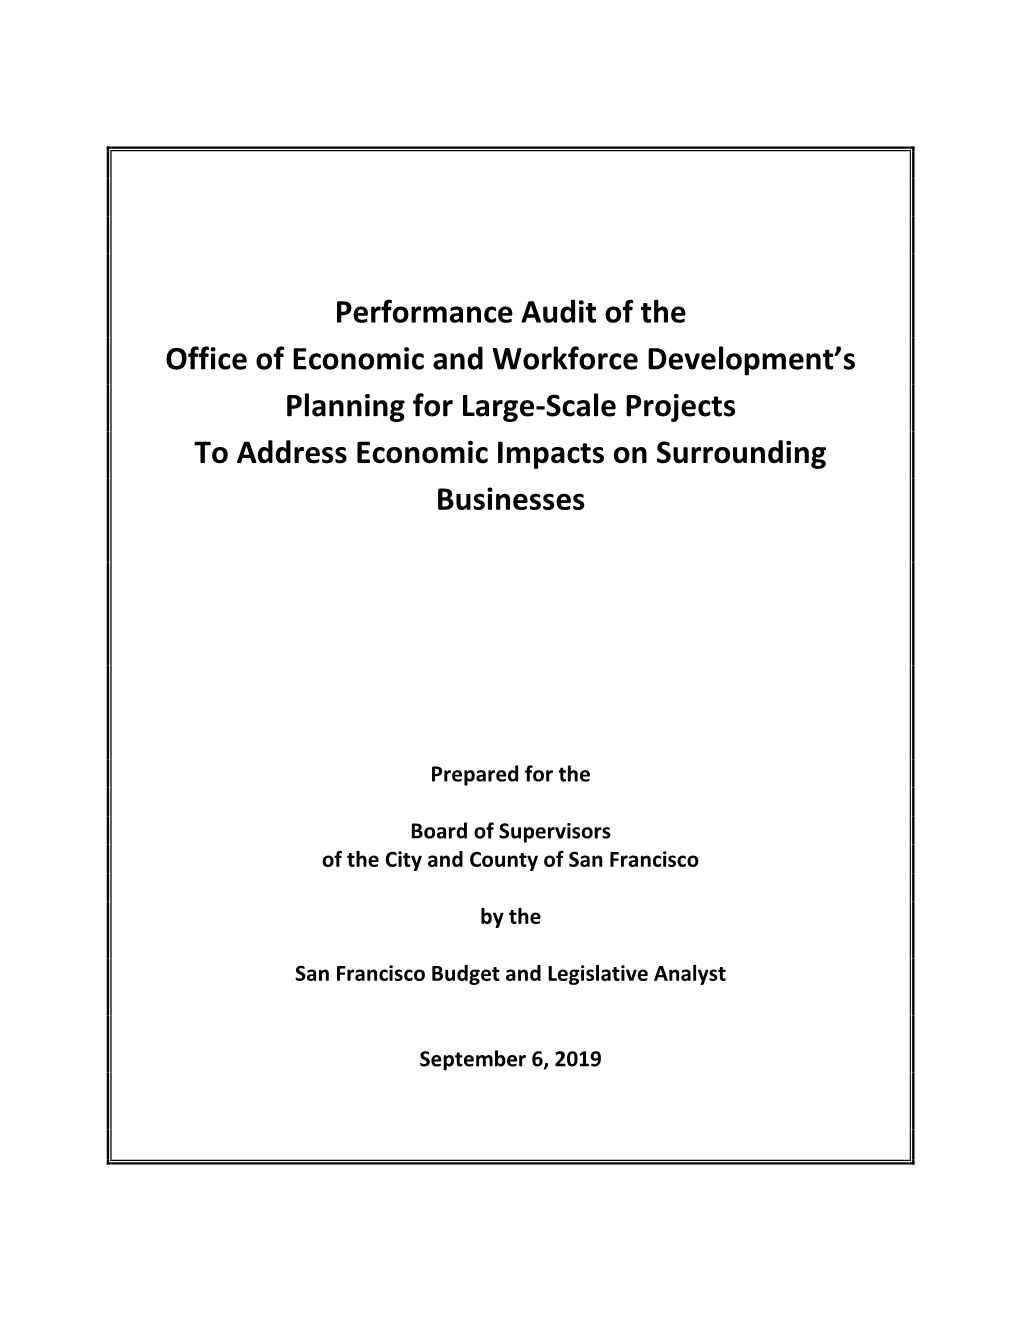 Performance Audit of the Office of Economic and Workforce Development’S Planning for Large-Scale Projects to Address Economic Impacts on Surrounding Businesses